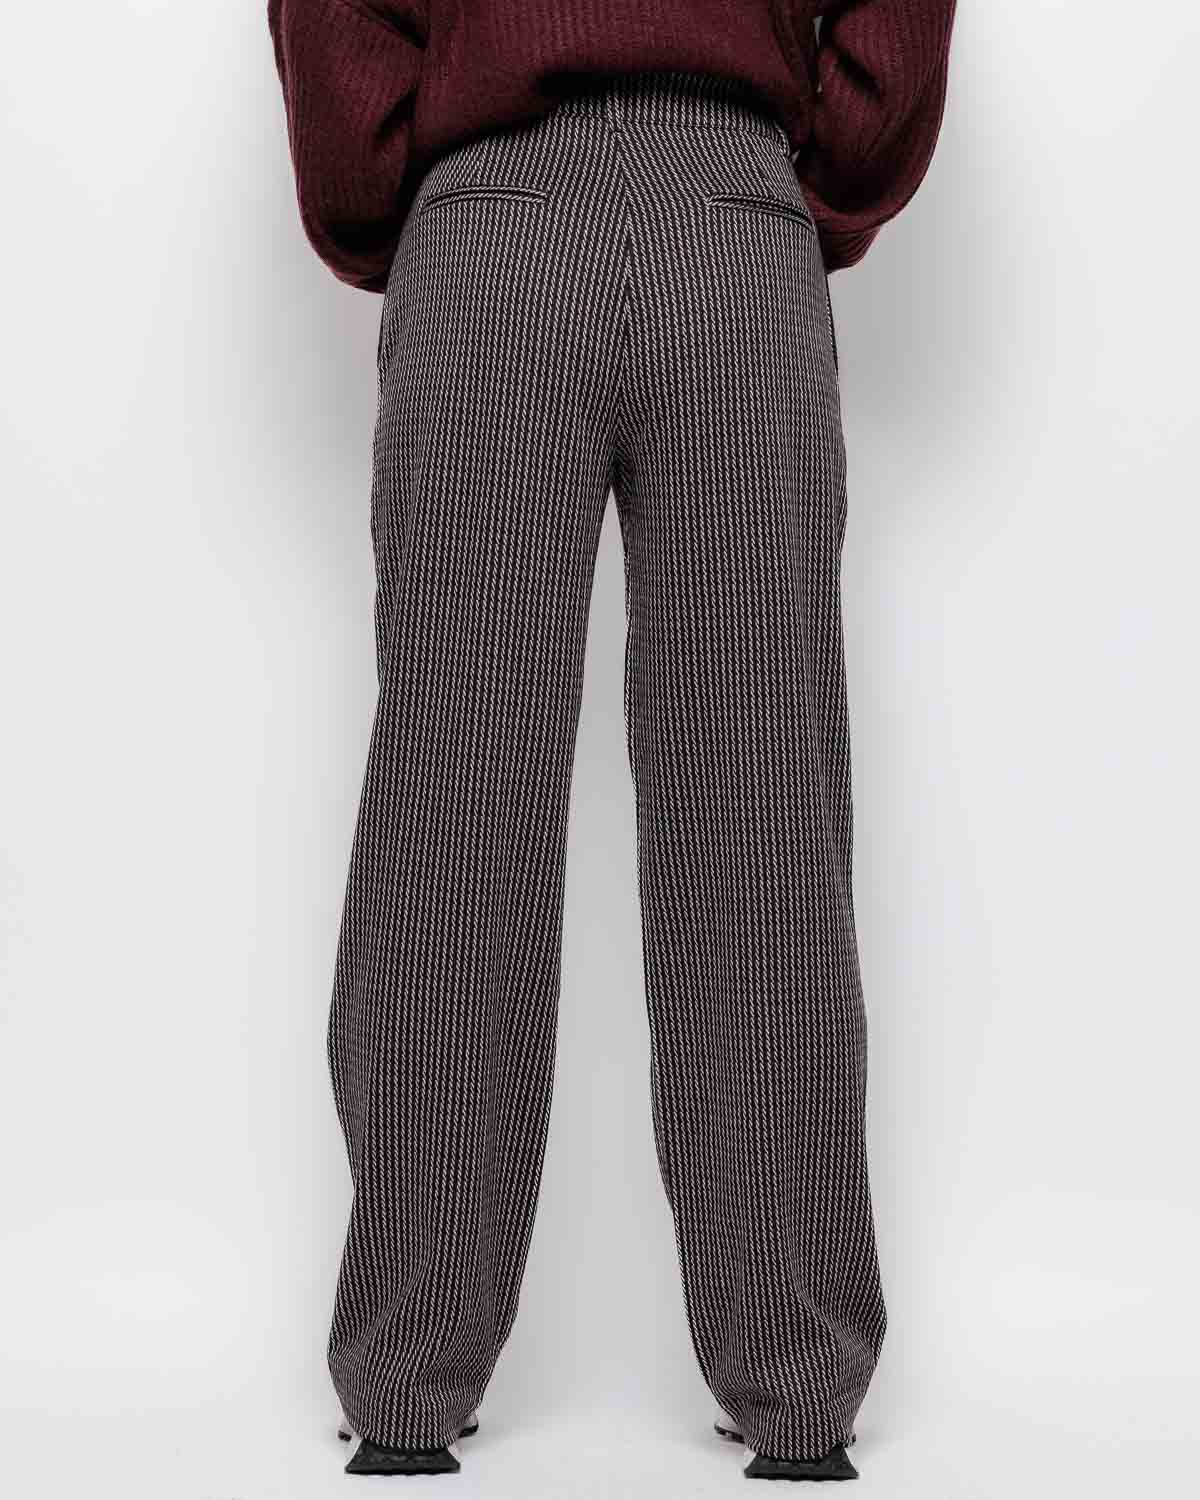 ICHI Kate Patterned Trouser in Port Royale